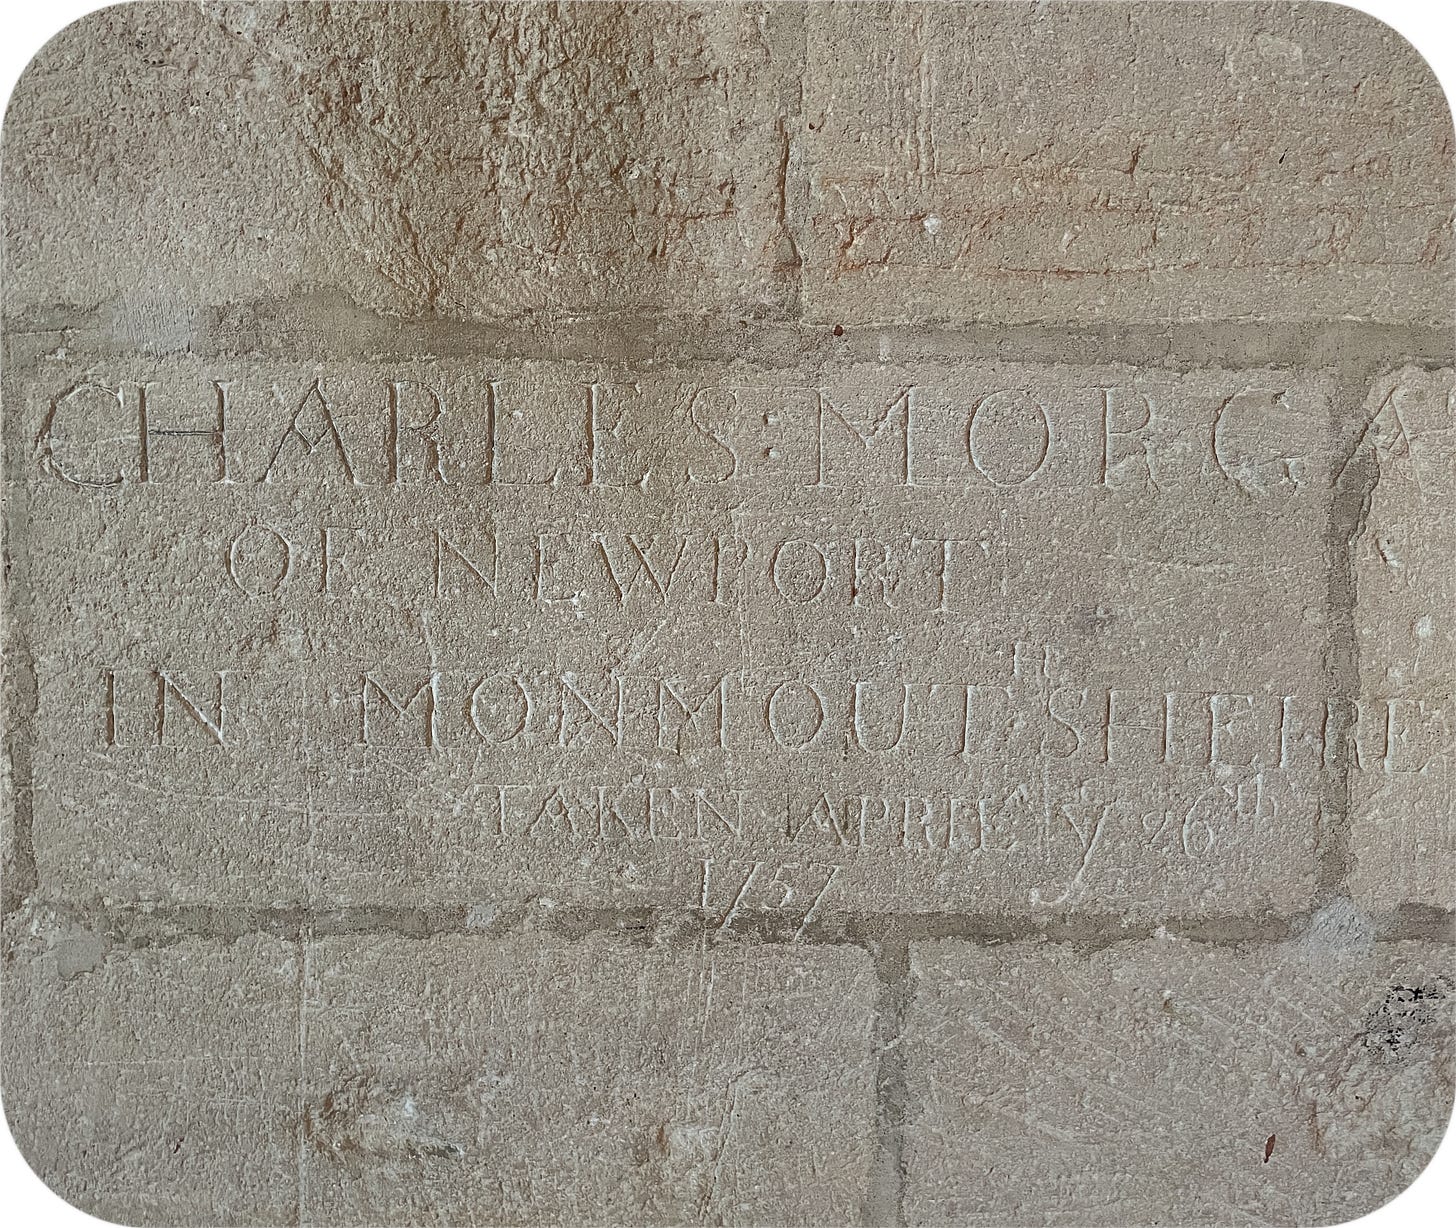 Prisoners names etched on the wall at the Chateau of Tarascon, France.